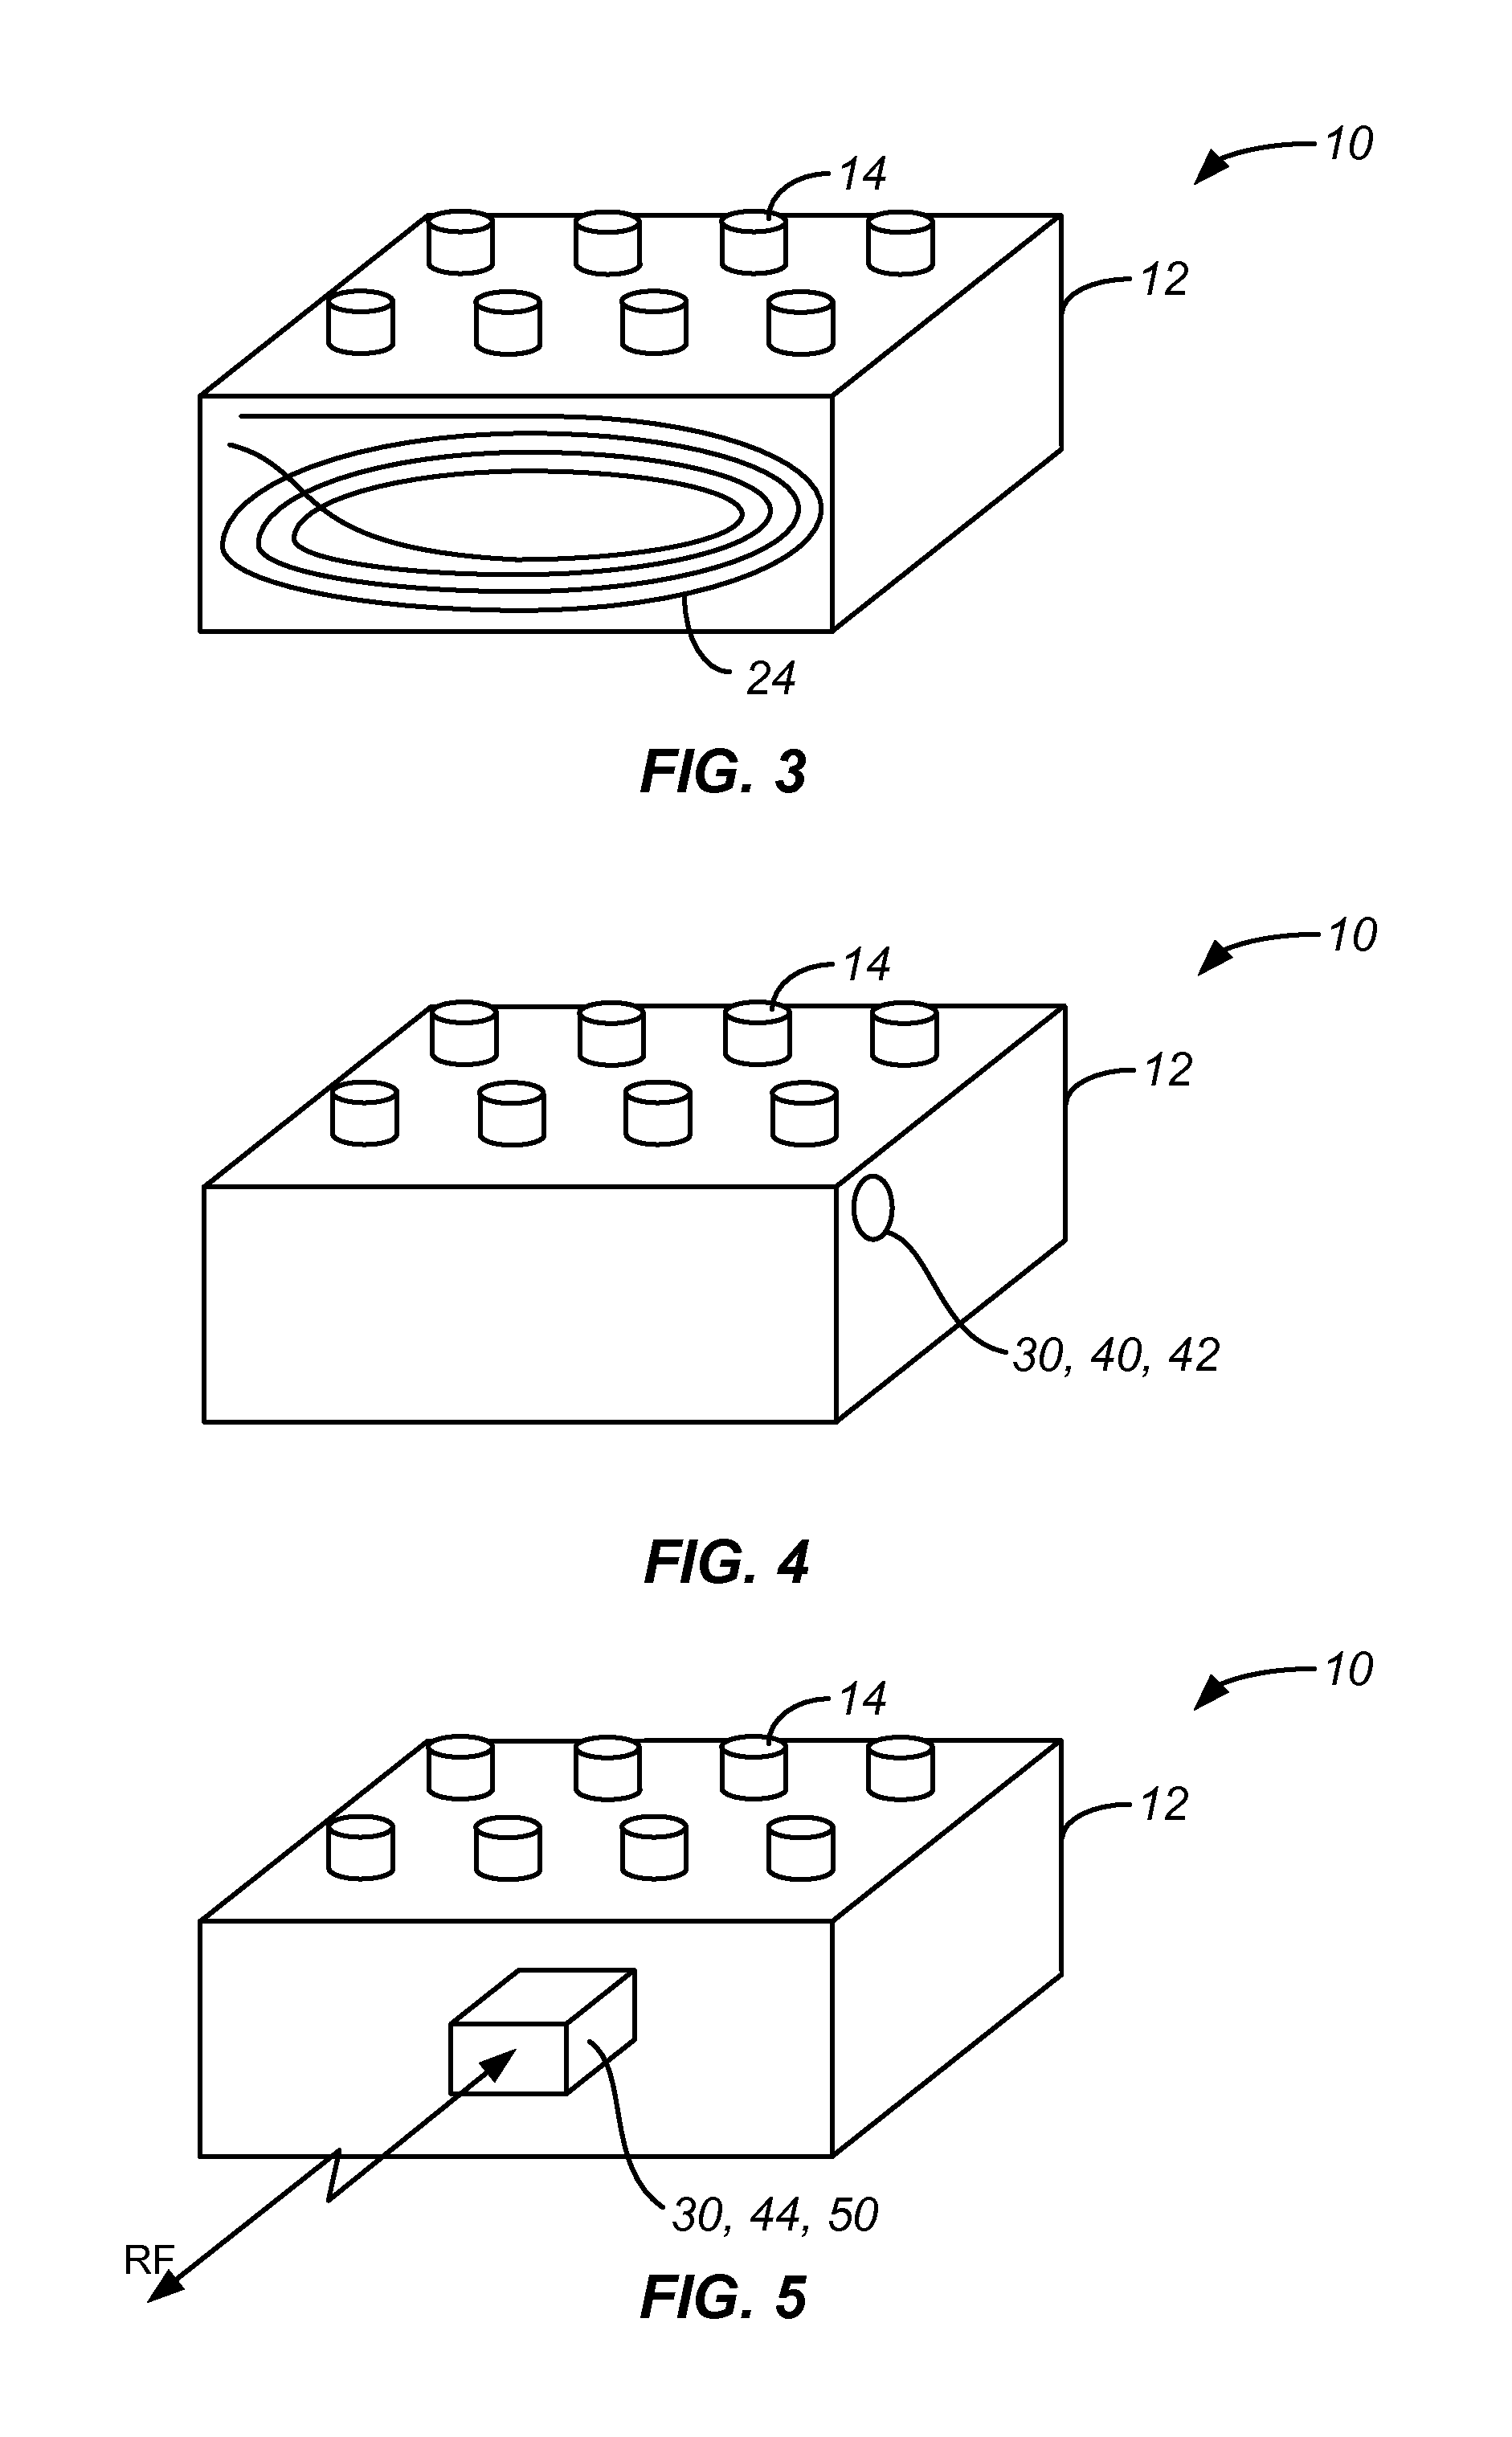 Toy brick with sensing, actuation and control